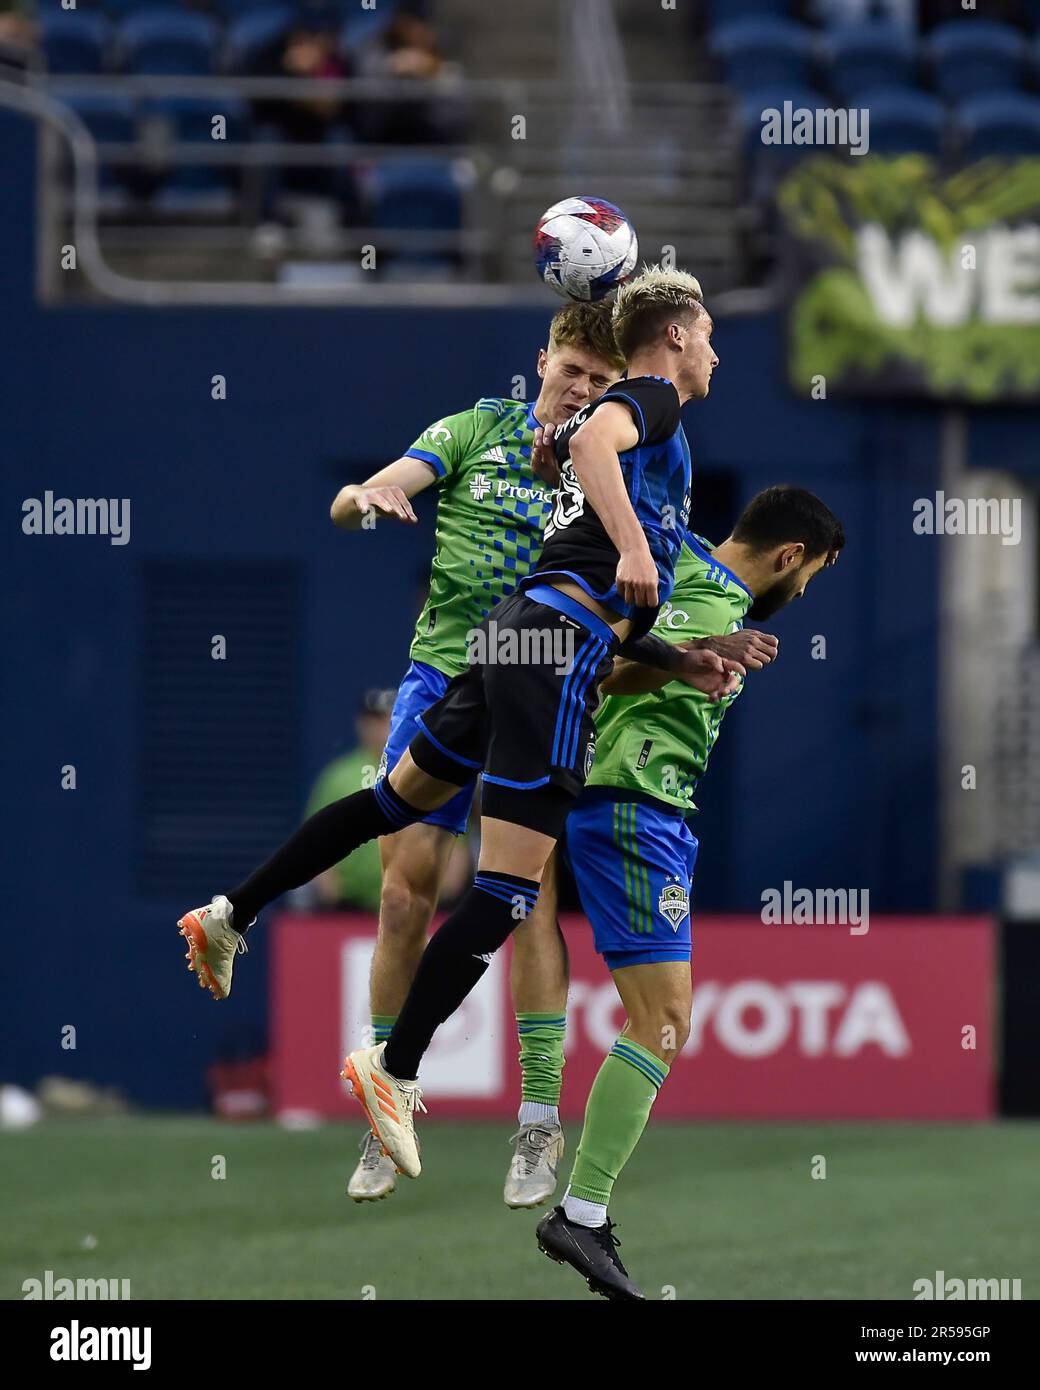 Seattle, WA, USA. 31st May, 2023. Seattle Sounders midfielder Reed Baker-Whiting (21) and San Jose Earthquakes forward Benji KikanoviÄ‡ (28) both try to make contact during the MLS soccer match between San Jose Earthquake and the Seattle Sounders FC at Lumen Field in Seattle, WA. Steve Faber/CSM/Alamy Live News Stock Photo